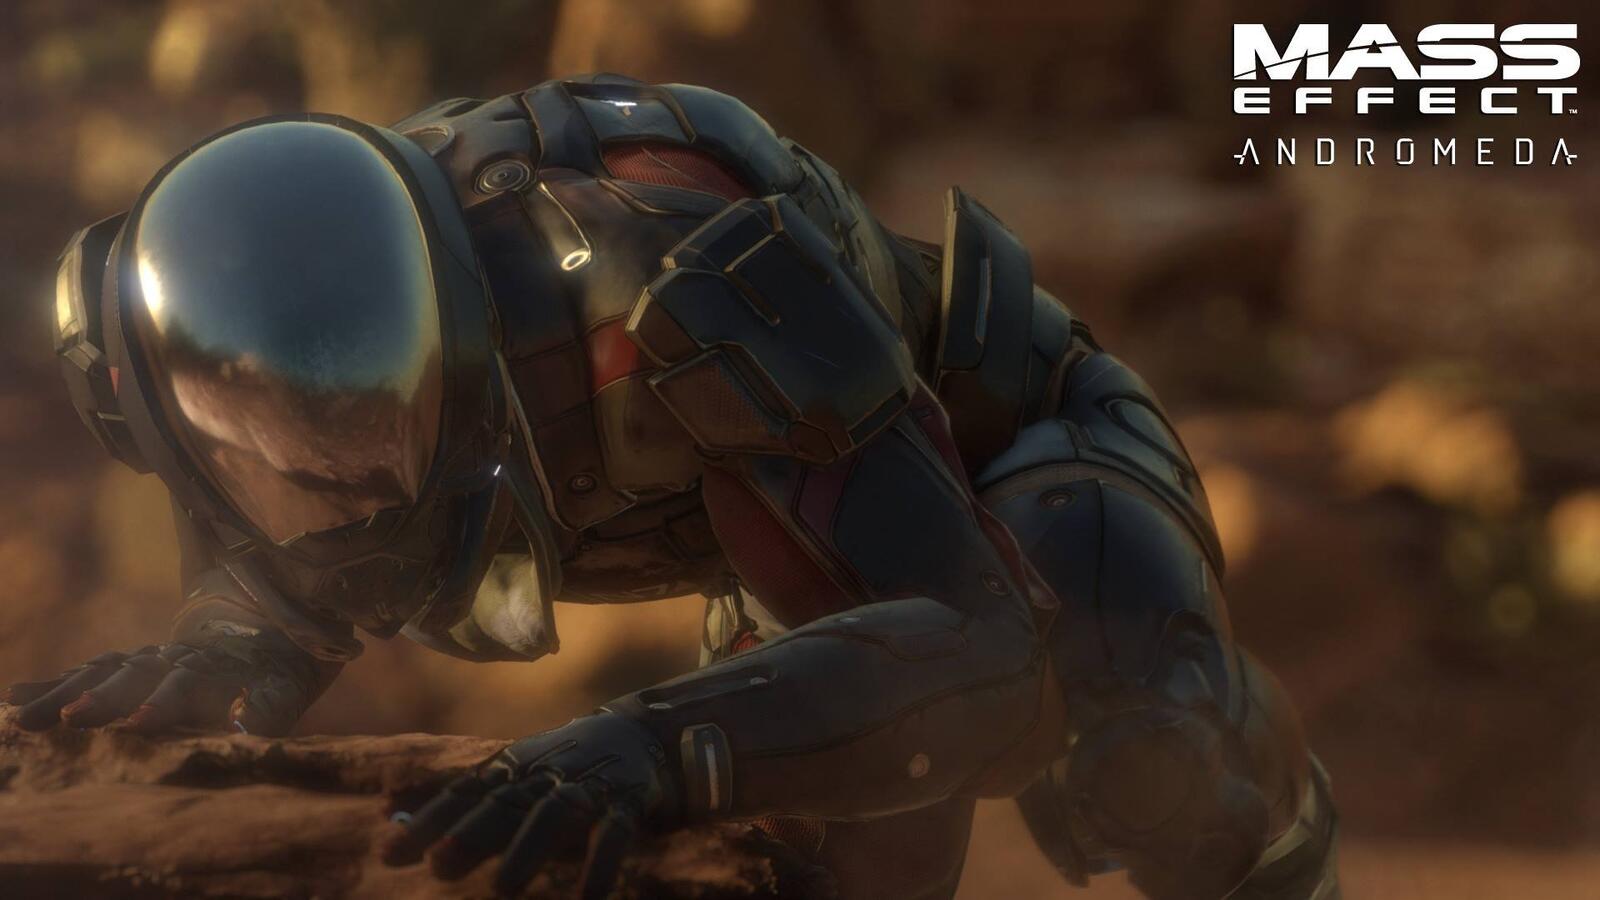 Free photo The spacesuit from mass effect andromeda.